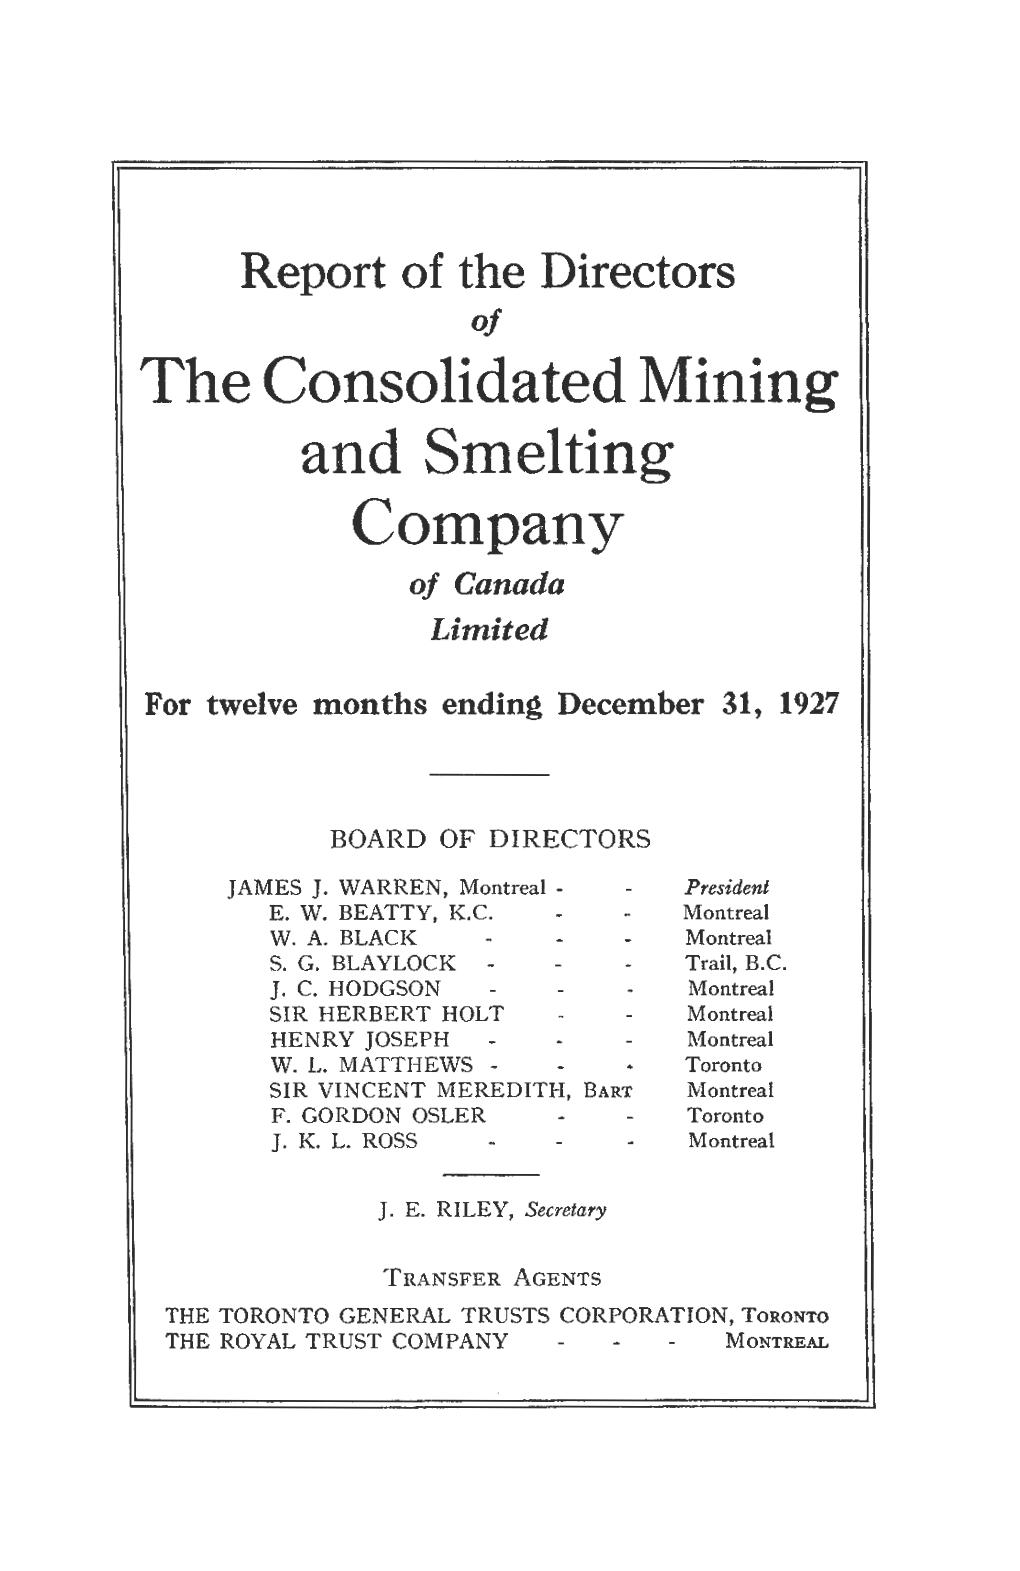 The Consolidated Mining and Smelting Company of Canada Limited